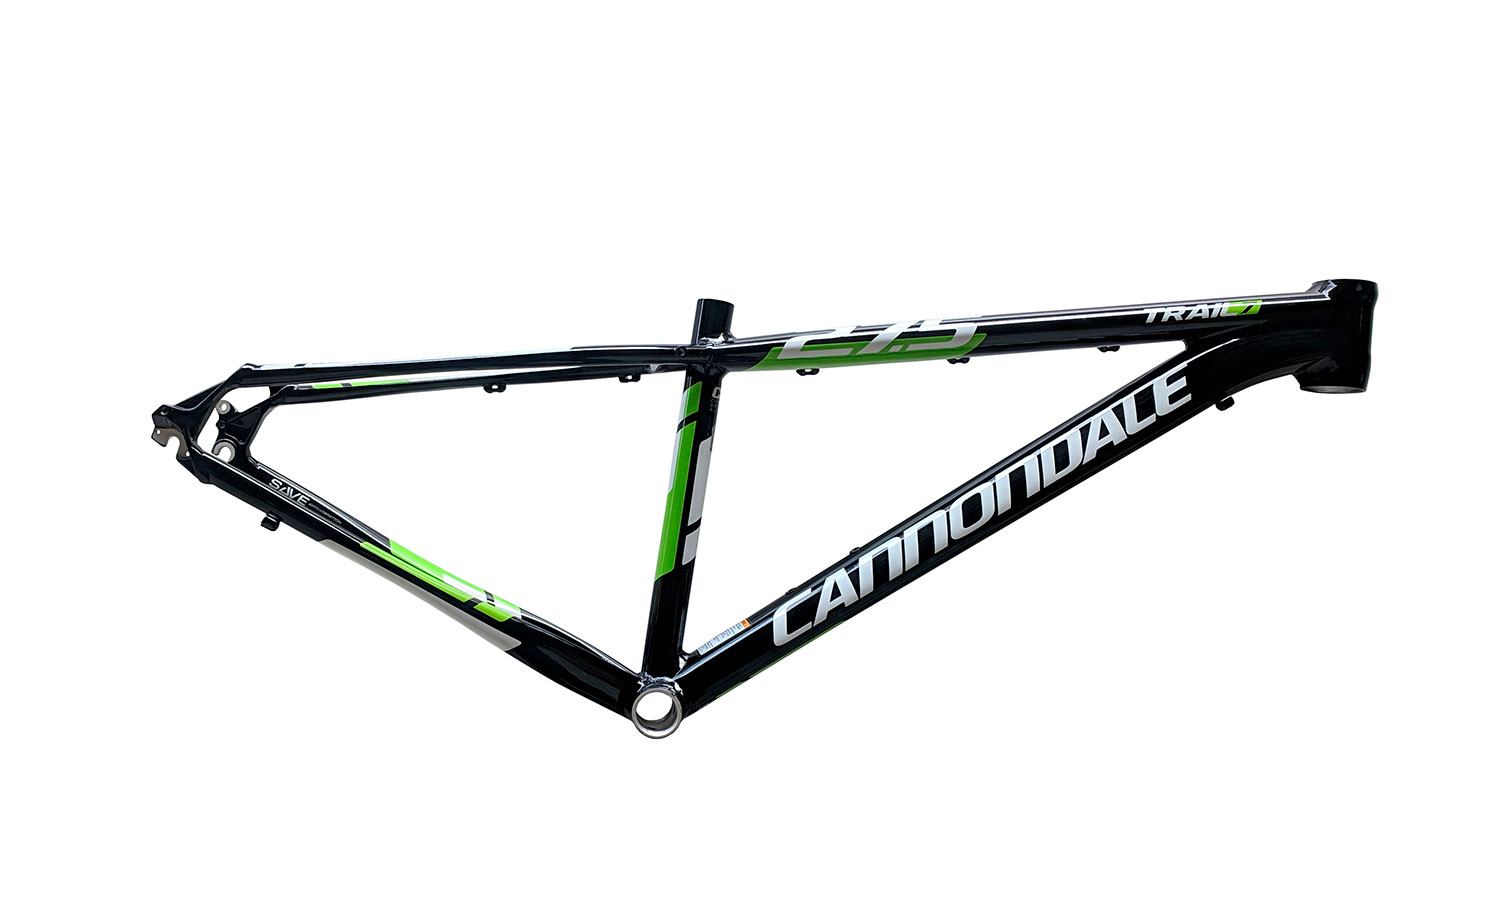 Рама Cannondale 27,5 "TRAIL 7 2015